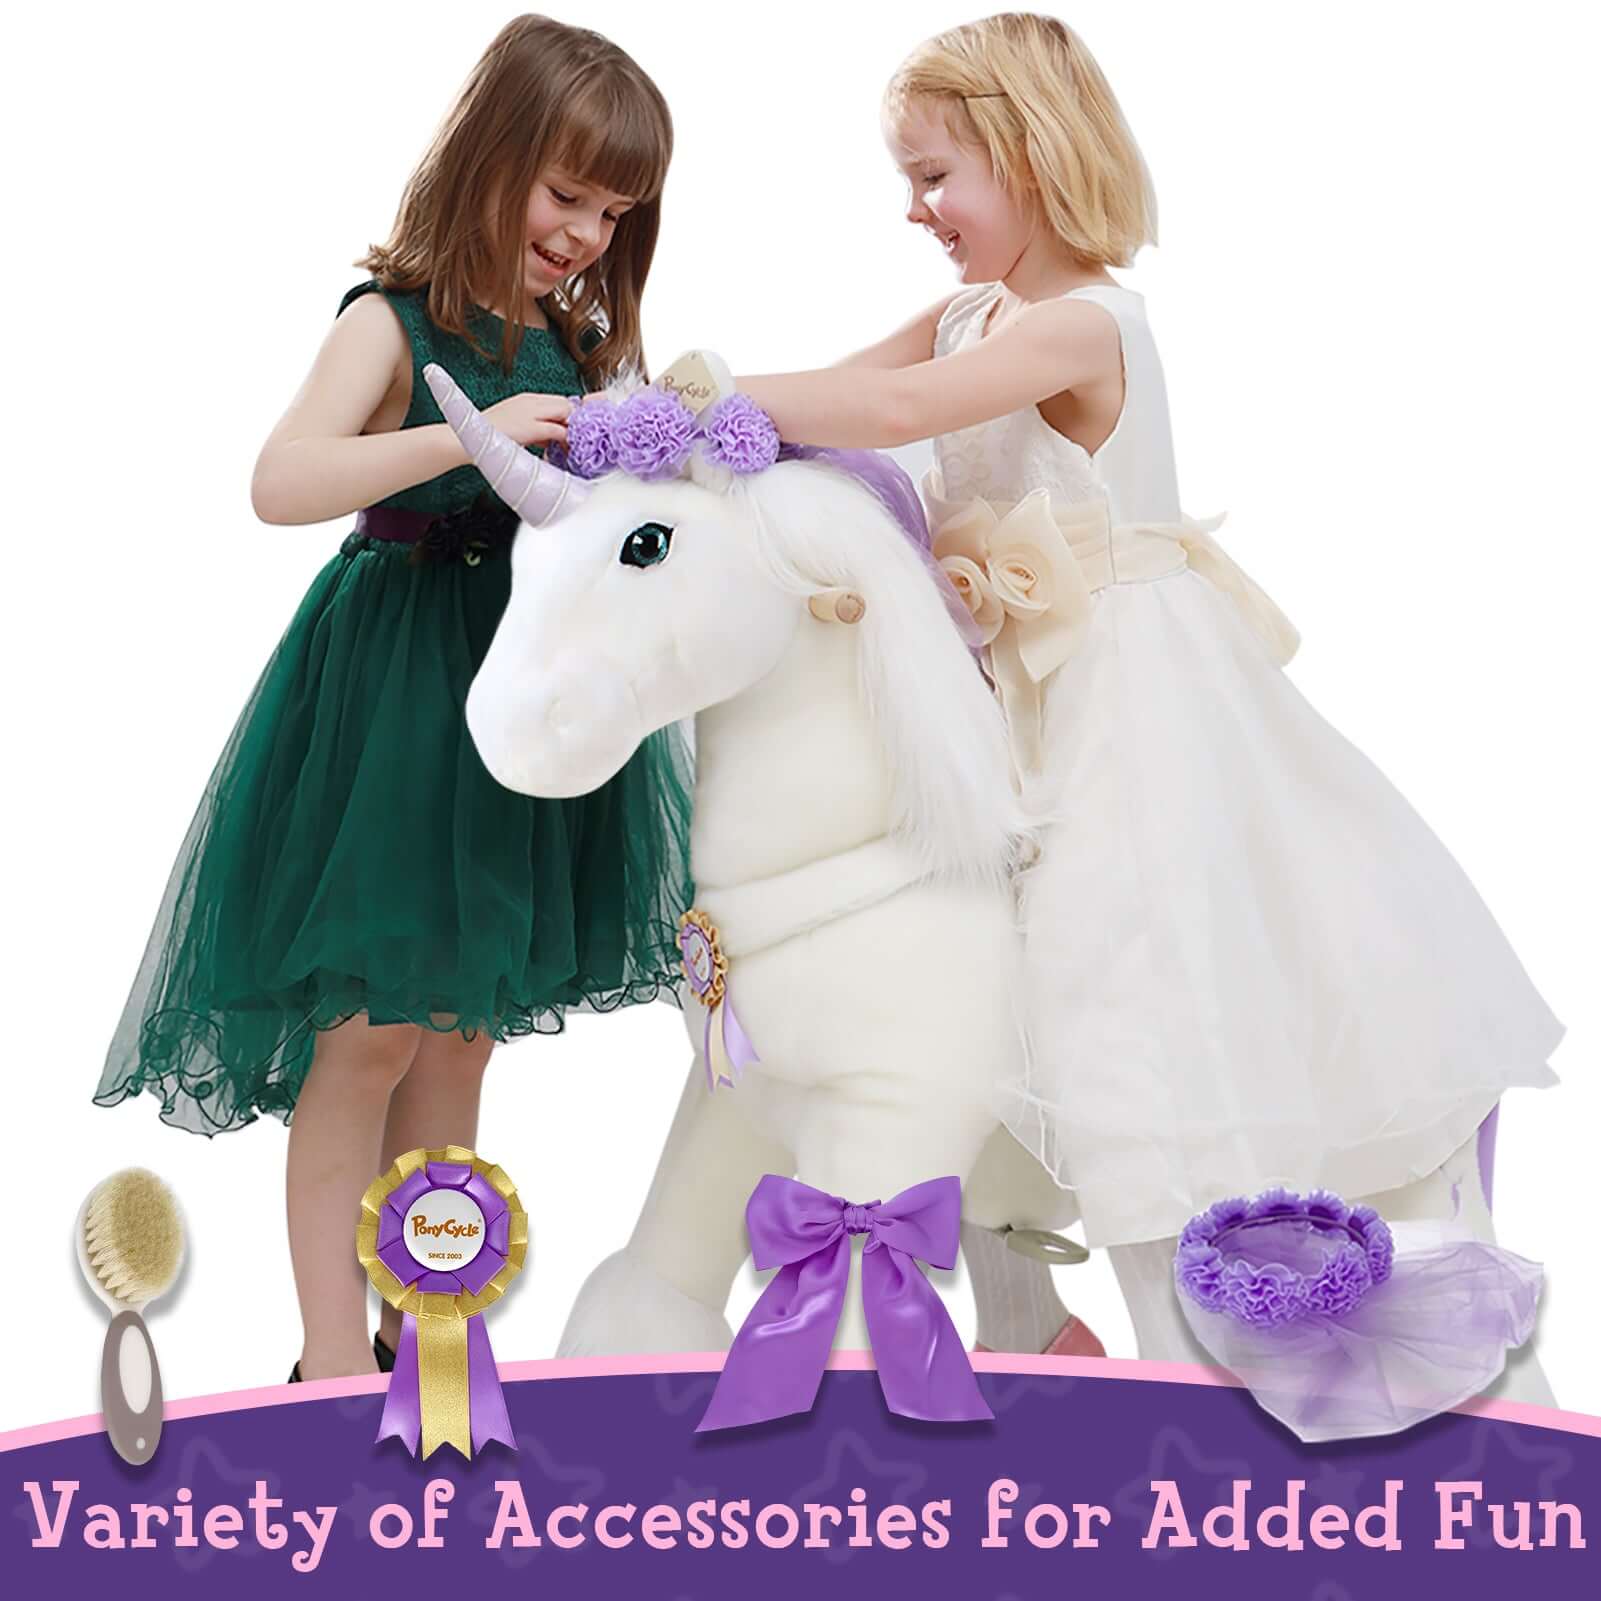 PonyCycle, Inc. PonyCycle K Purple Unicorn Toy Age 3-5 (Accessories included)